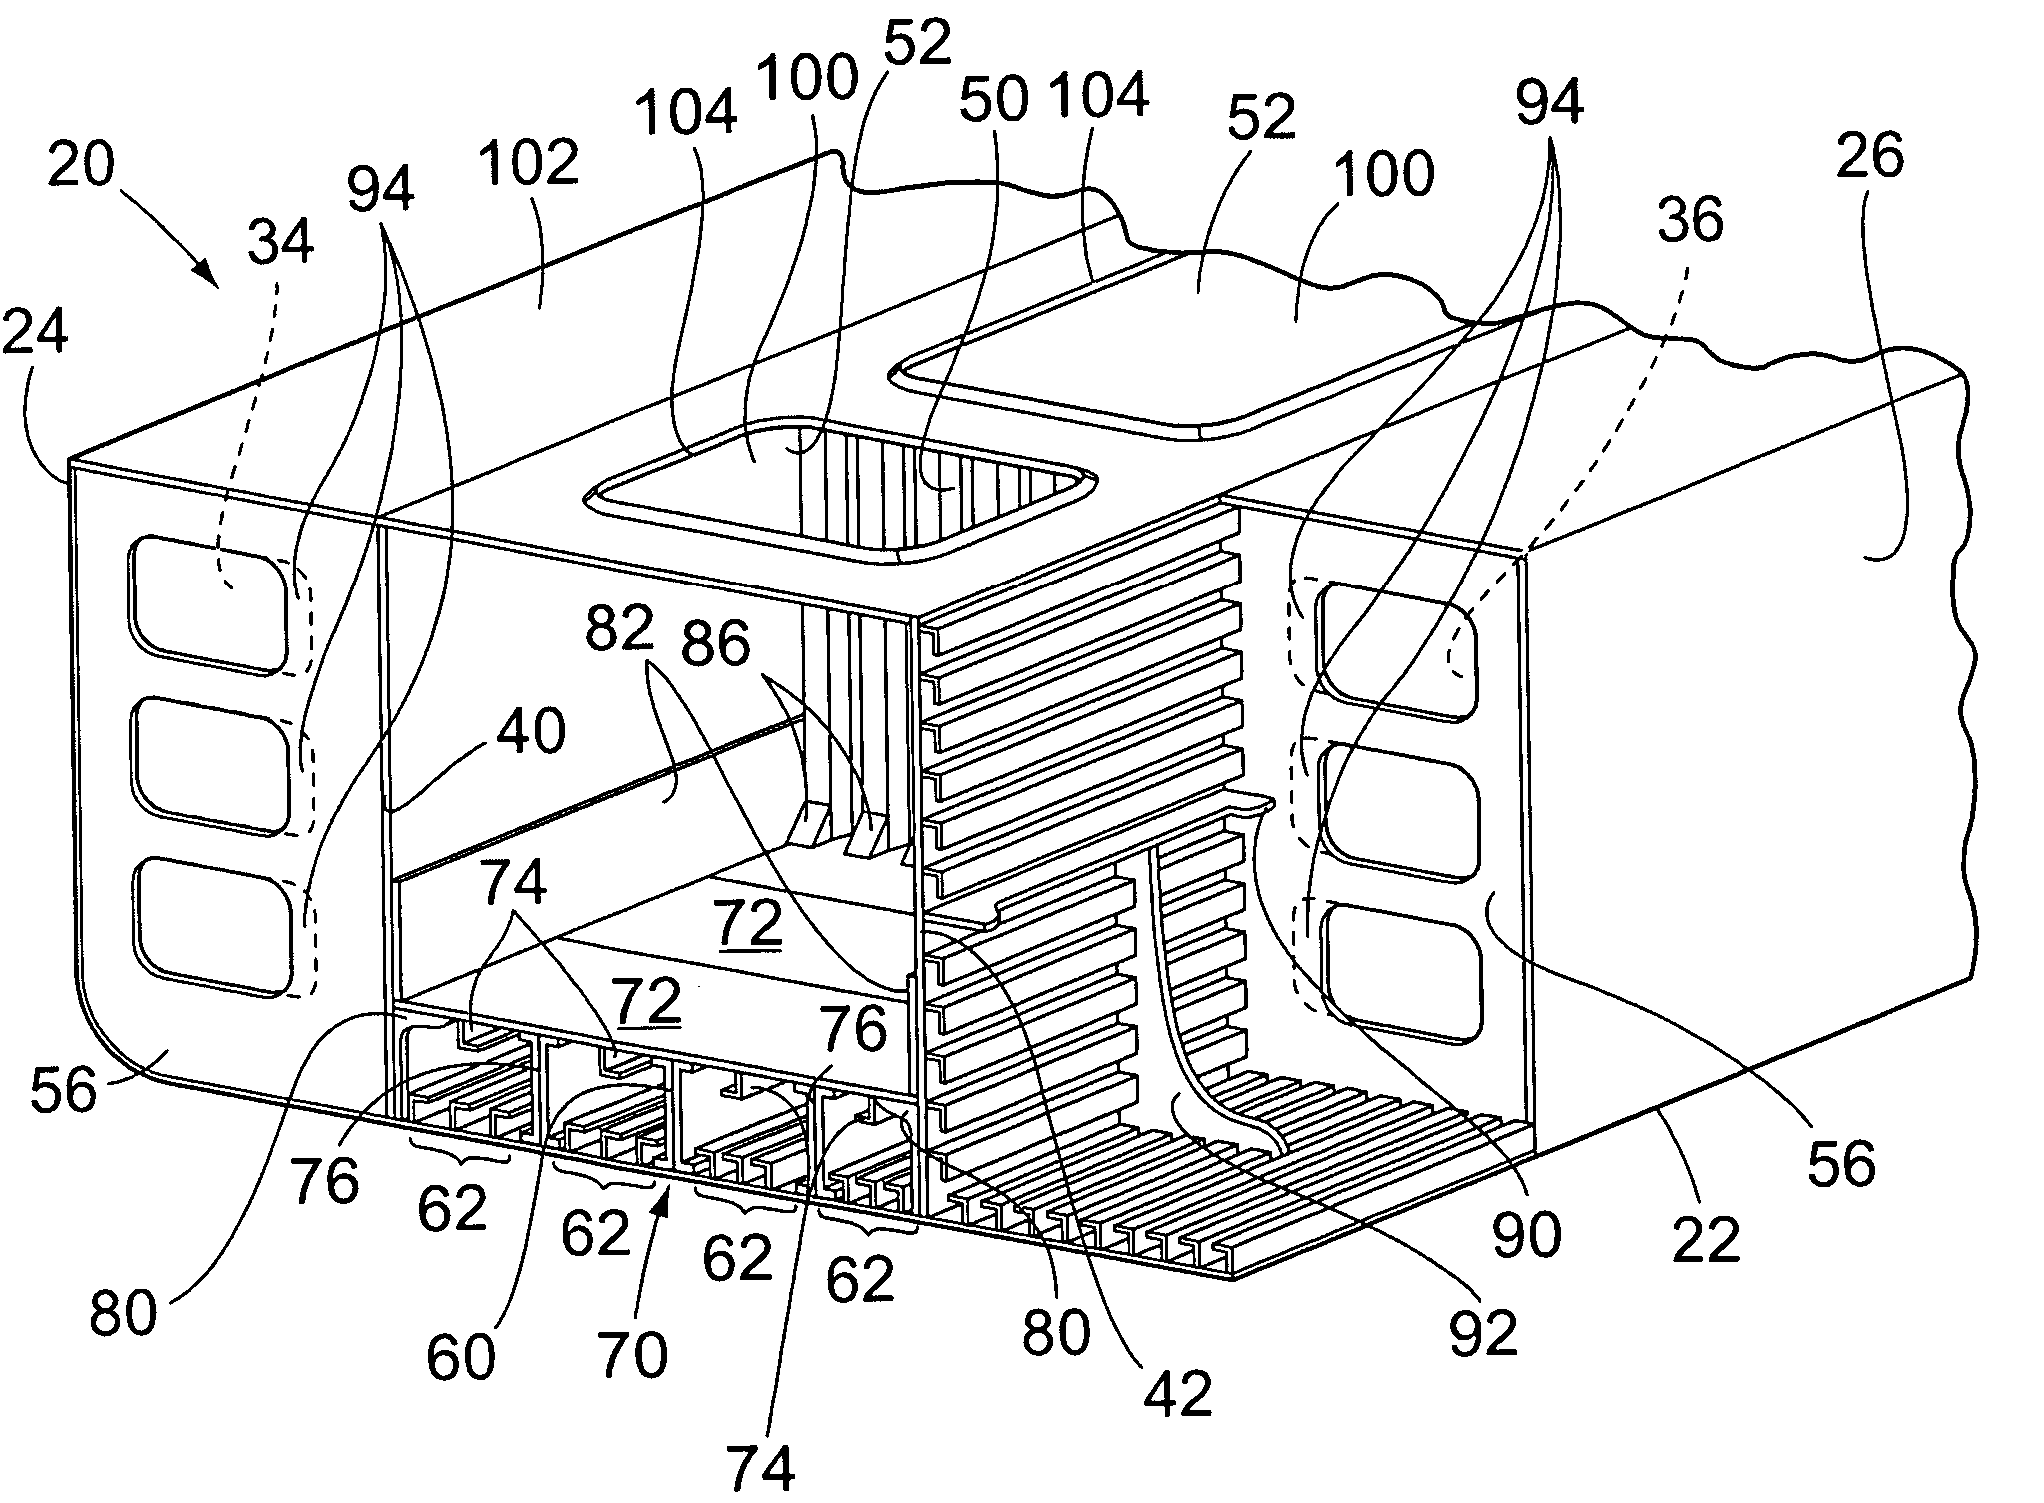 Double-hull ore carrying vessel conversion from single-hull oil tanker and method of performing the same